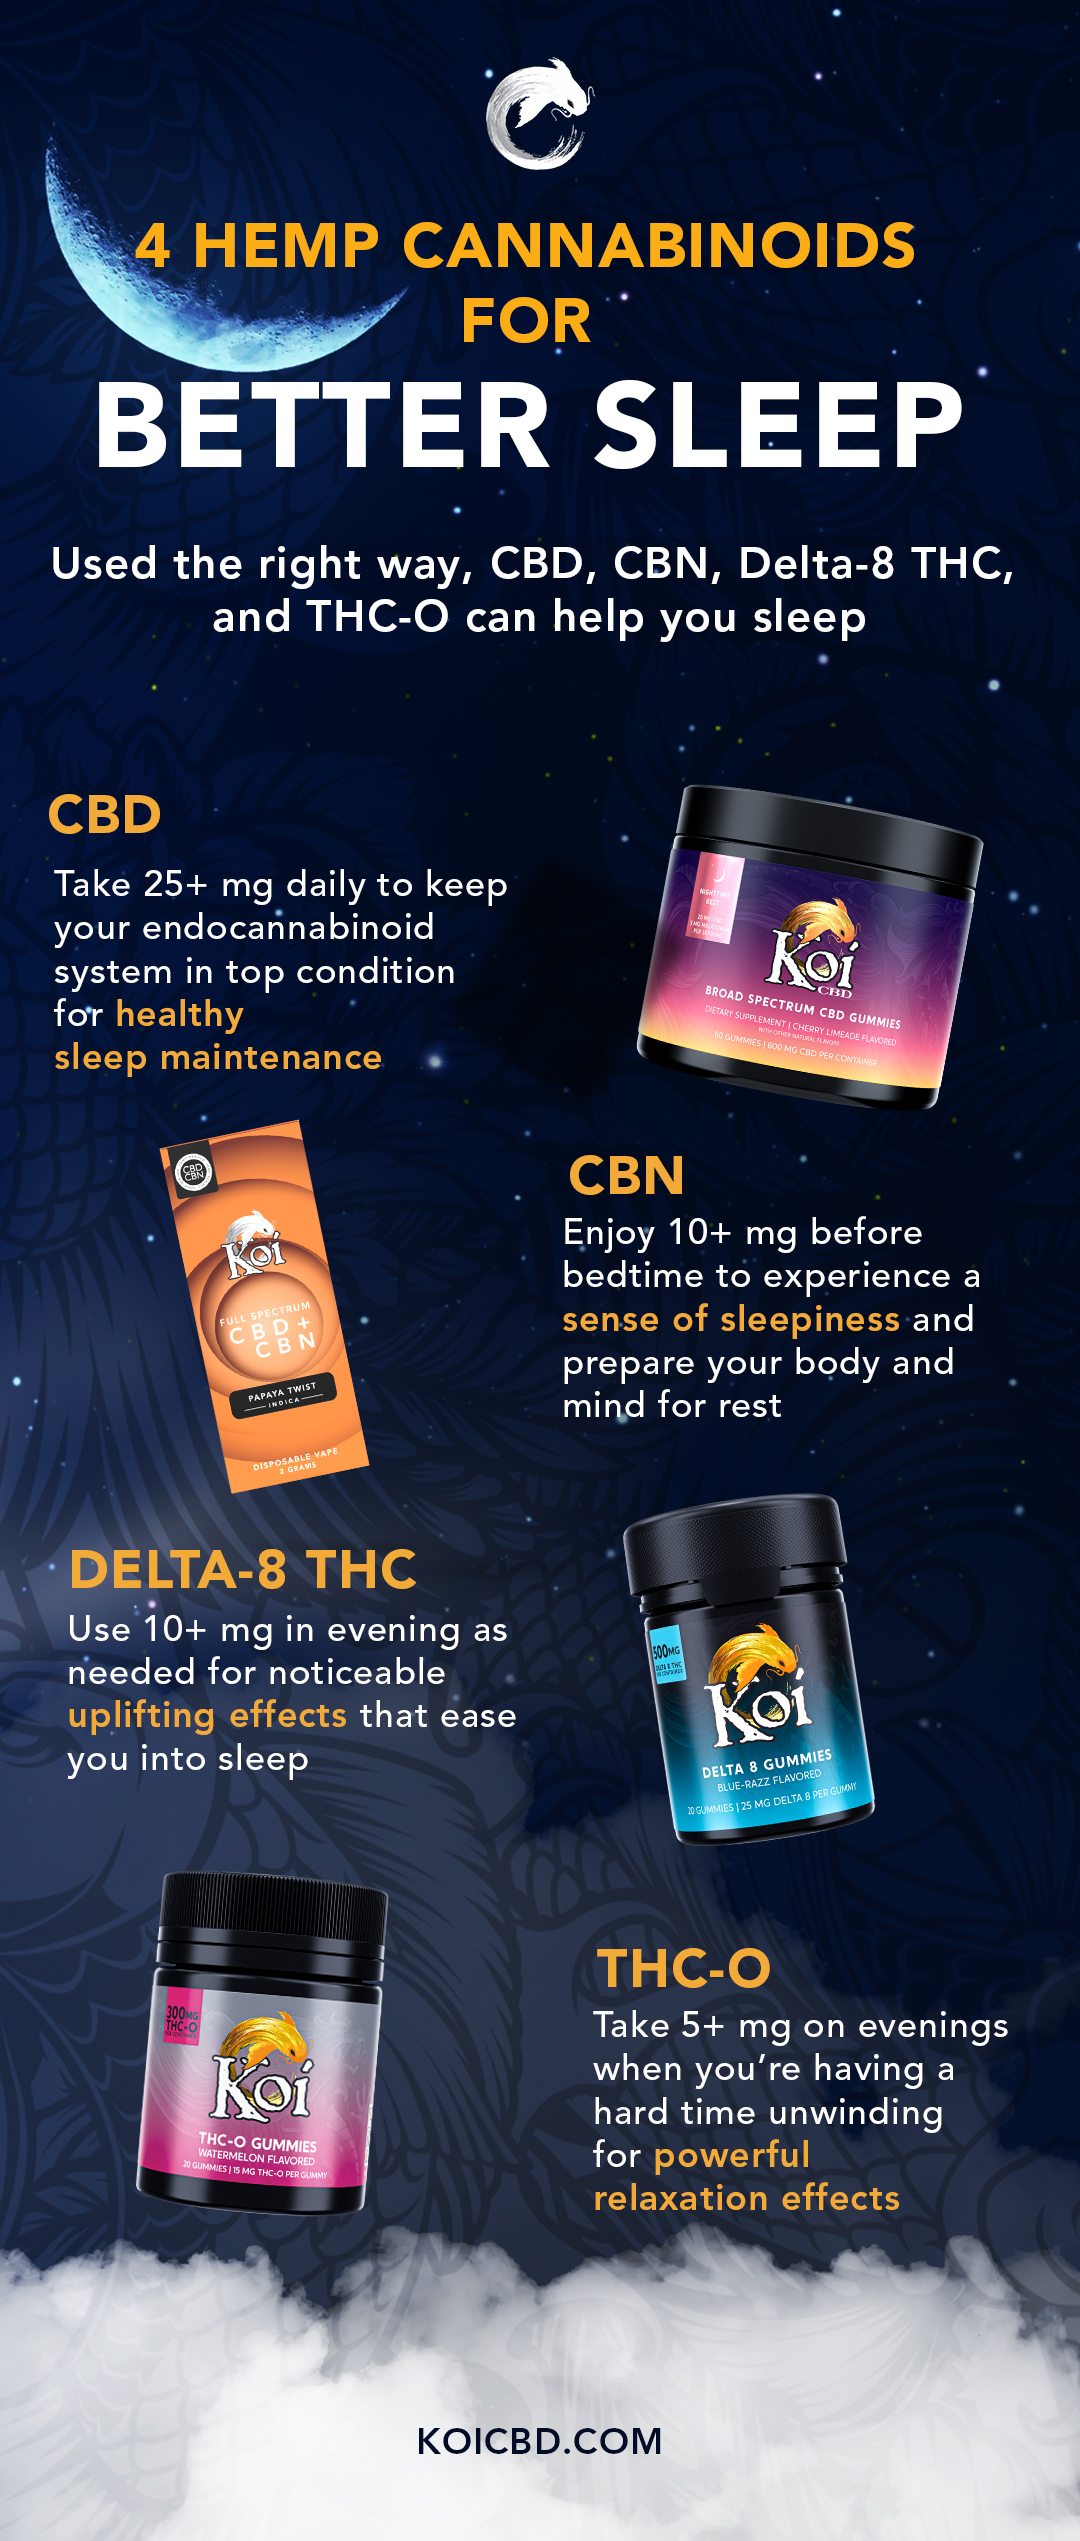 Infographic with guide on using CBD, Delta-8 and THC-O for sleep